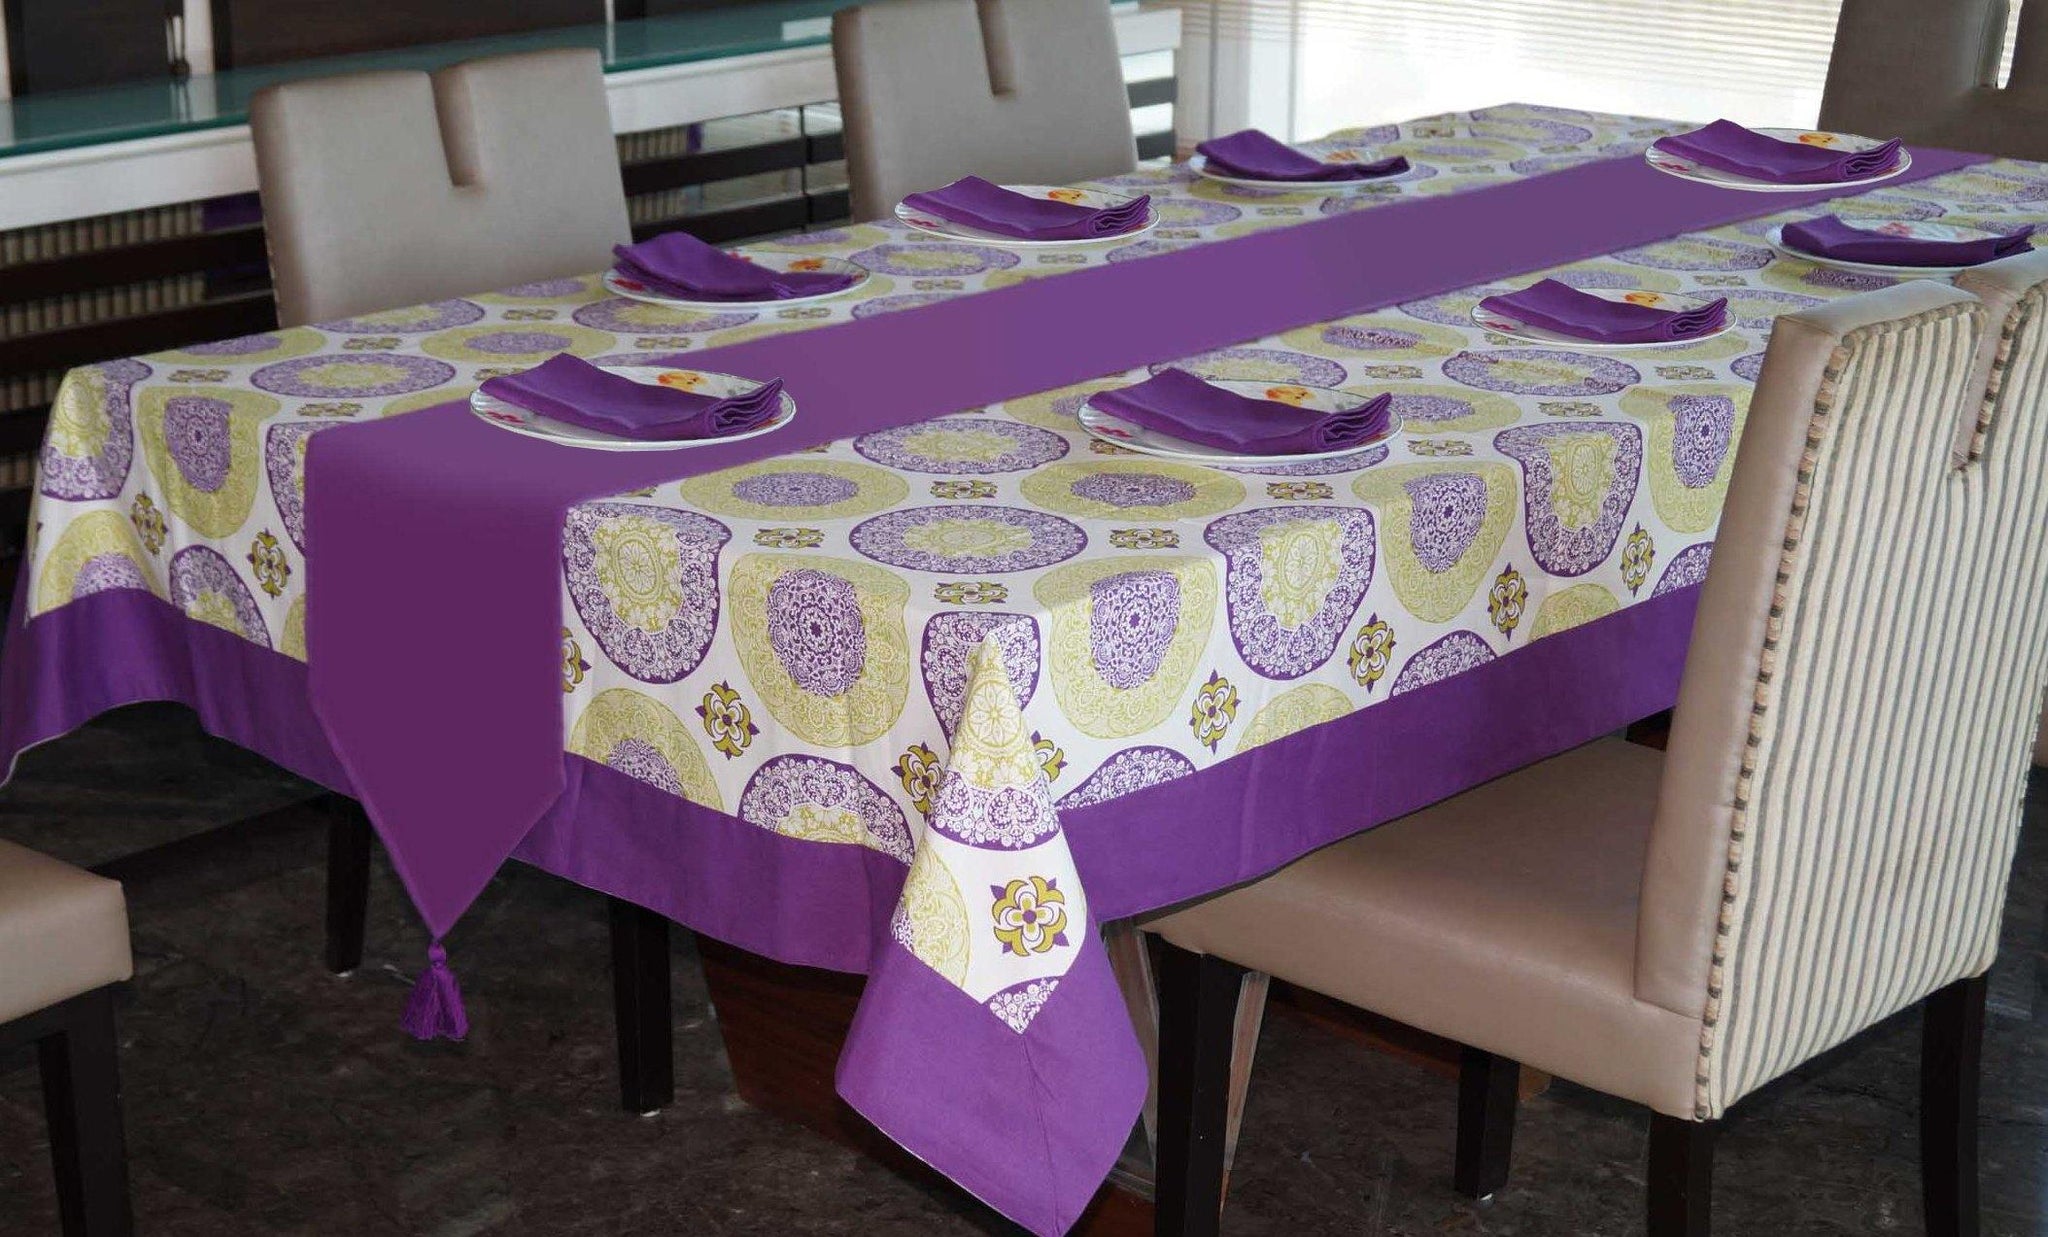 Lushomes Bold Printed 8 Seater Table Linen Set - Lushomes